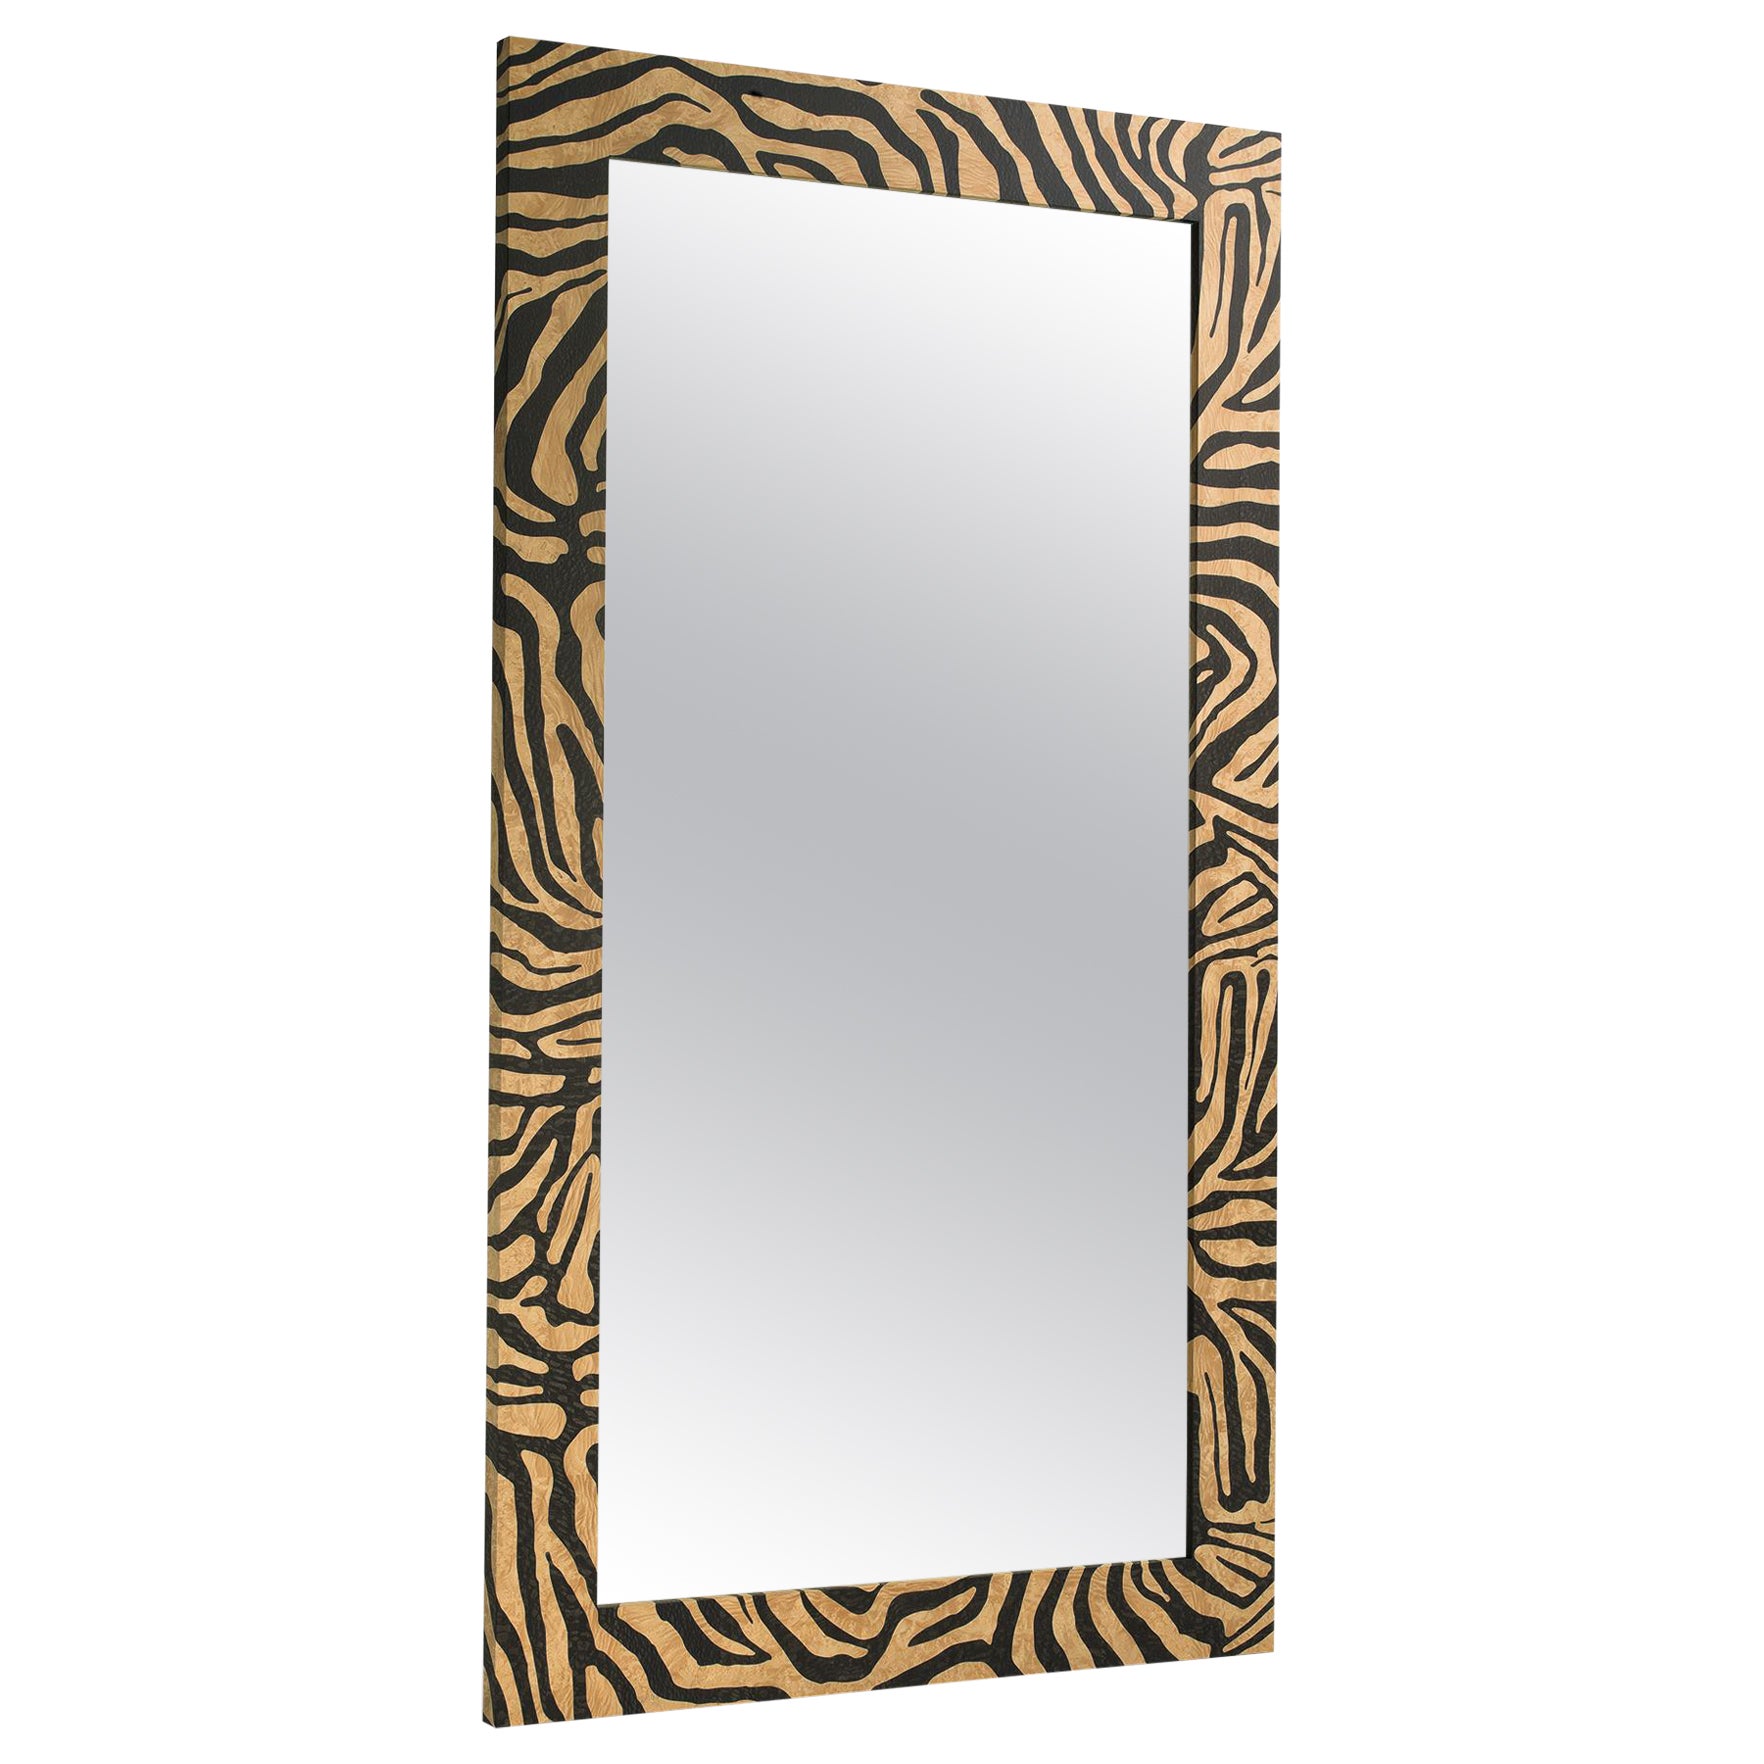 Kivu Mirror with Solid Wood Structure, Zebra Inlay and Bronzed Mirror For Sale